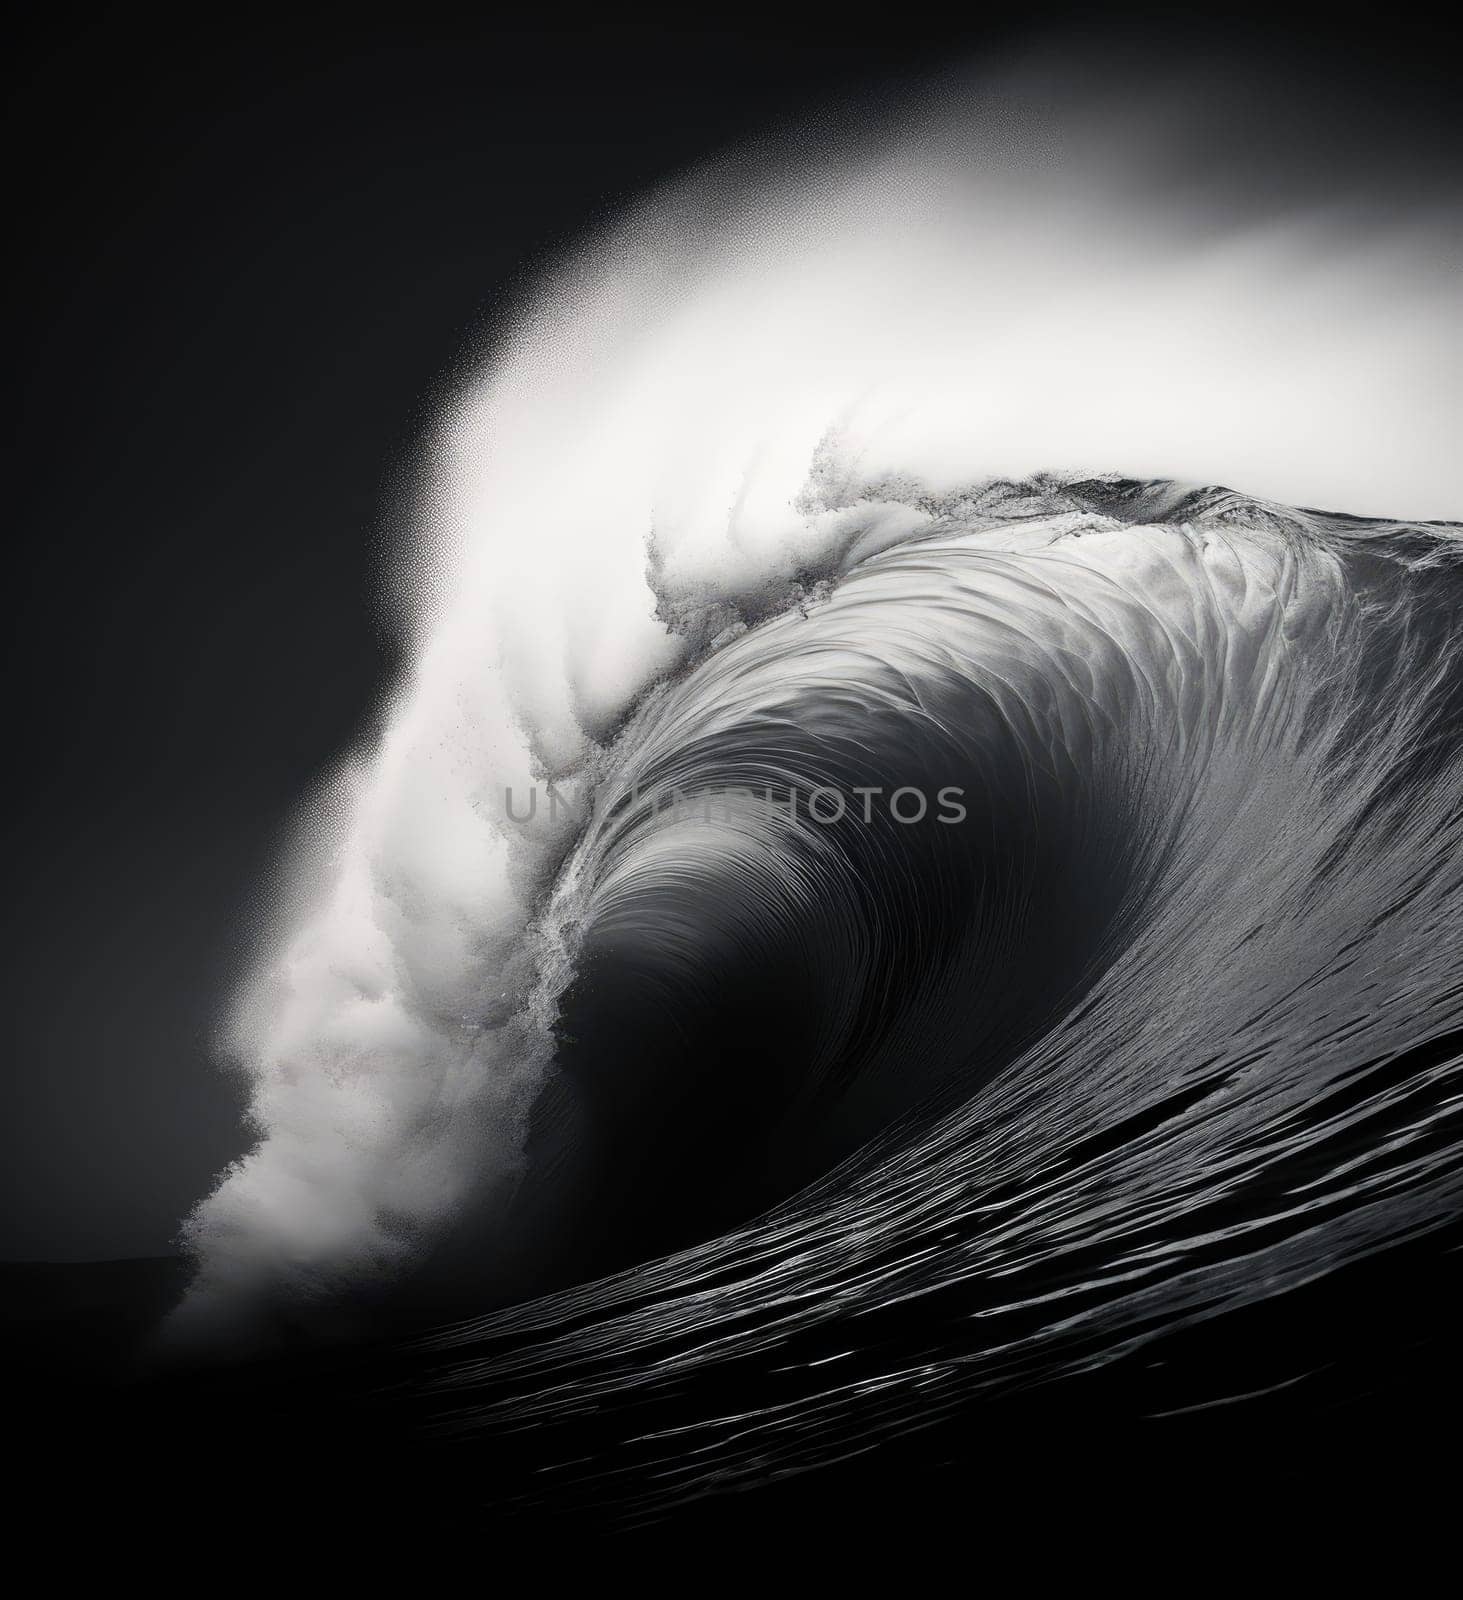 Black and white image of ocean wave during storm. Huge wave breaking with a lot of spray and splash. Sea water background